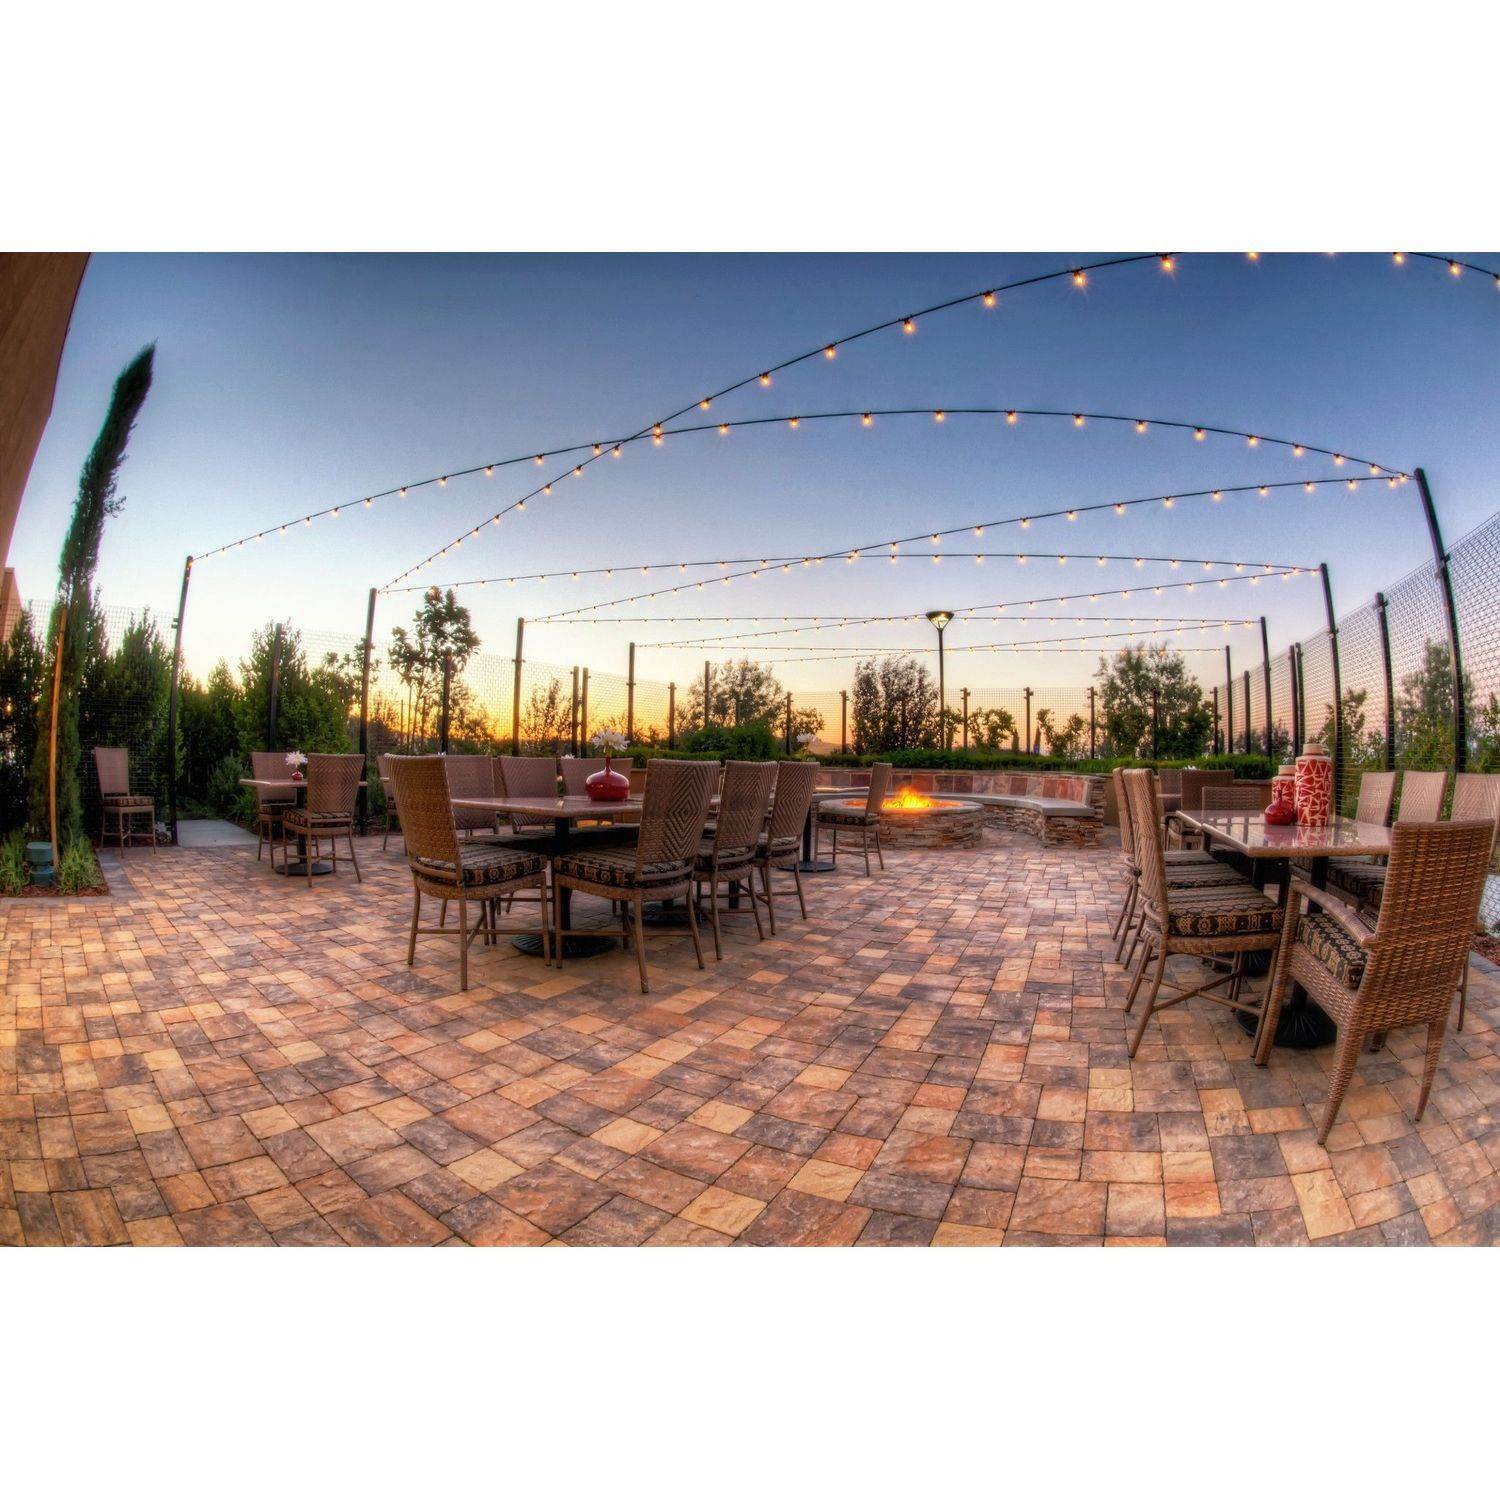 19. Trilogy at The Vineyards edificio a 1700 Trilogy Parkway, Brentwood, CA 94513